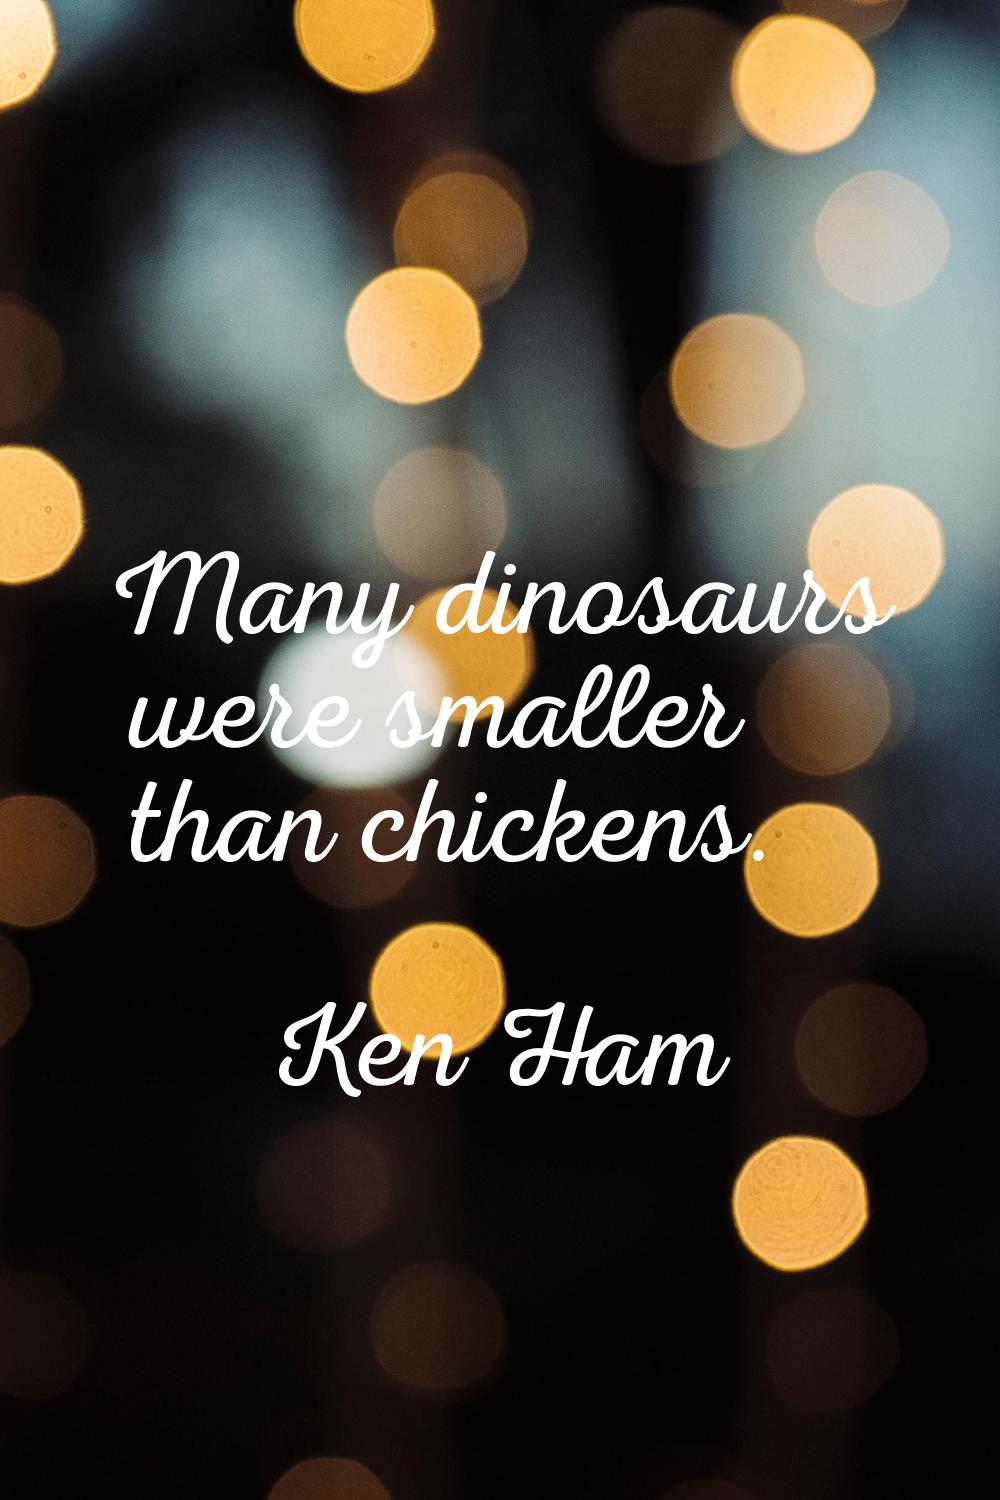 Many dinosaurs were smaller than chickens.